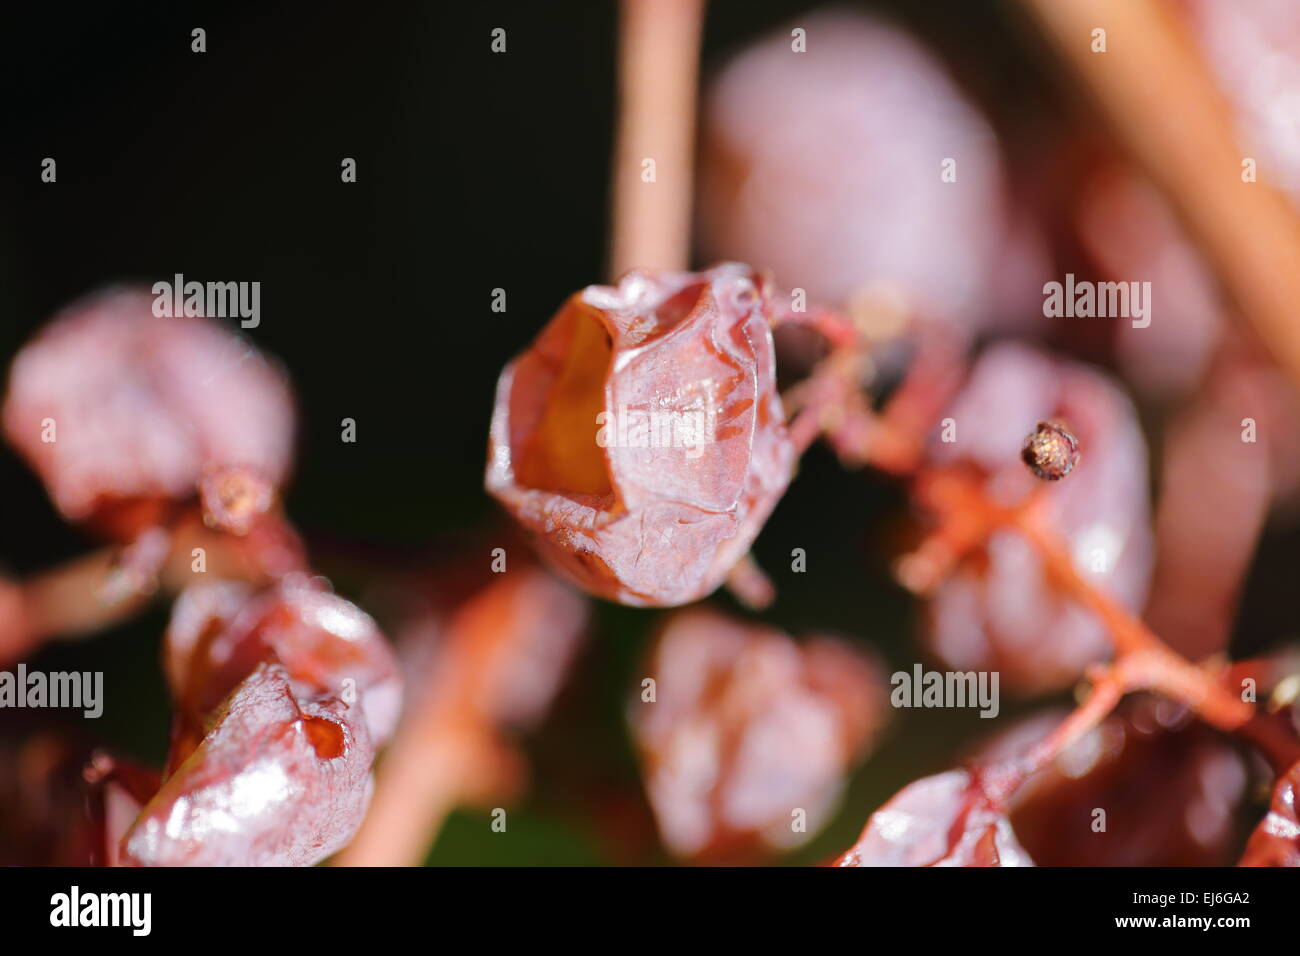 Bunch of decaying grapes on a grape vine Stock Photo